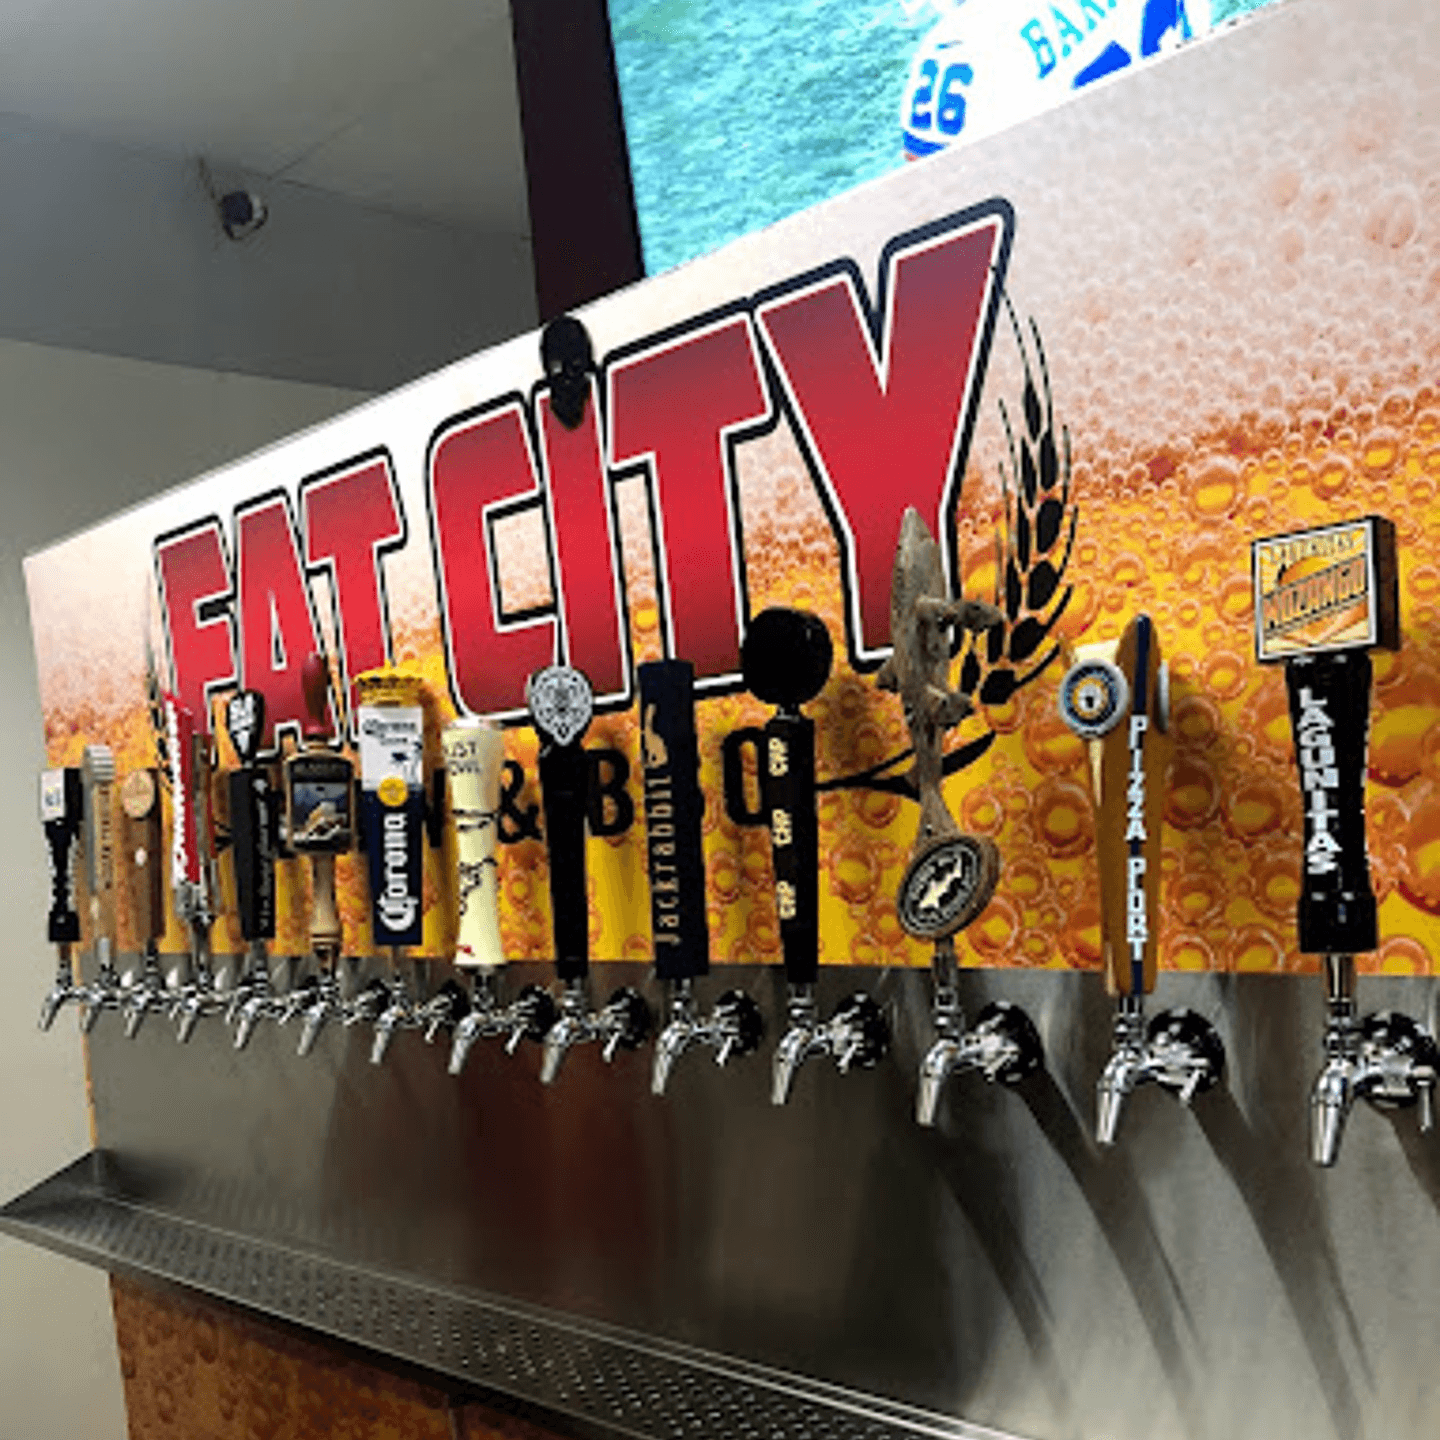 Ice-Cold Brews on Tap